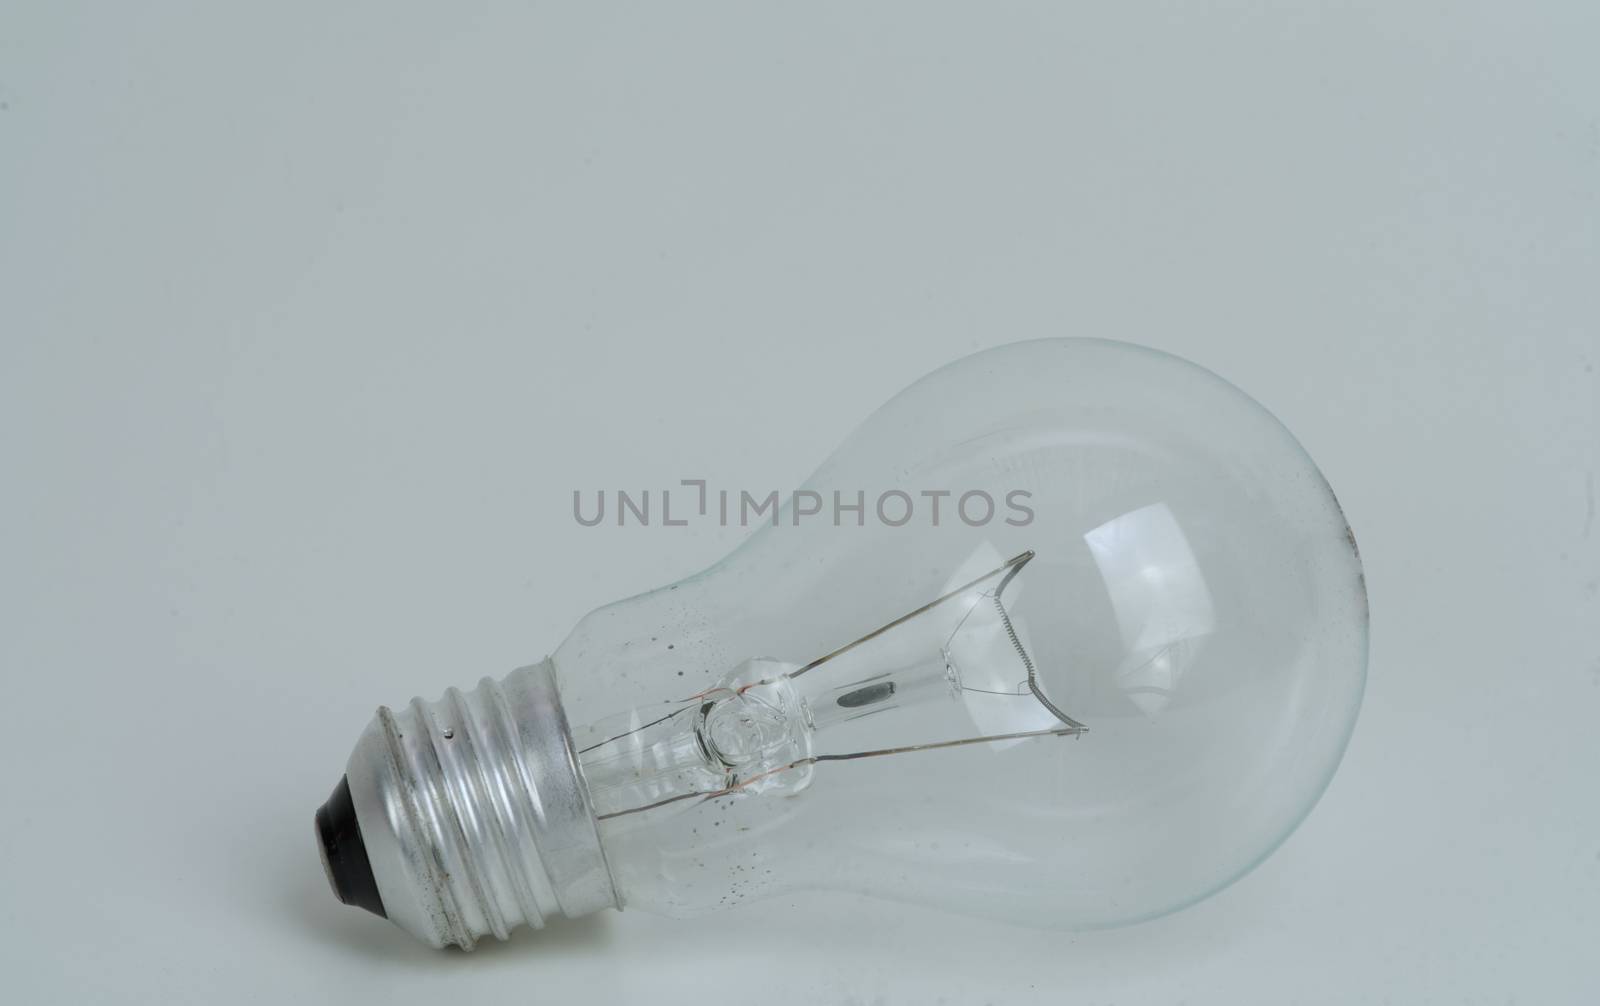 The Abstract previously used the light bulb concept on white iso by noppha80